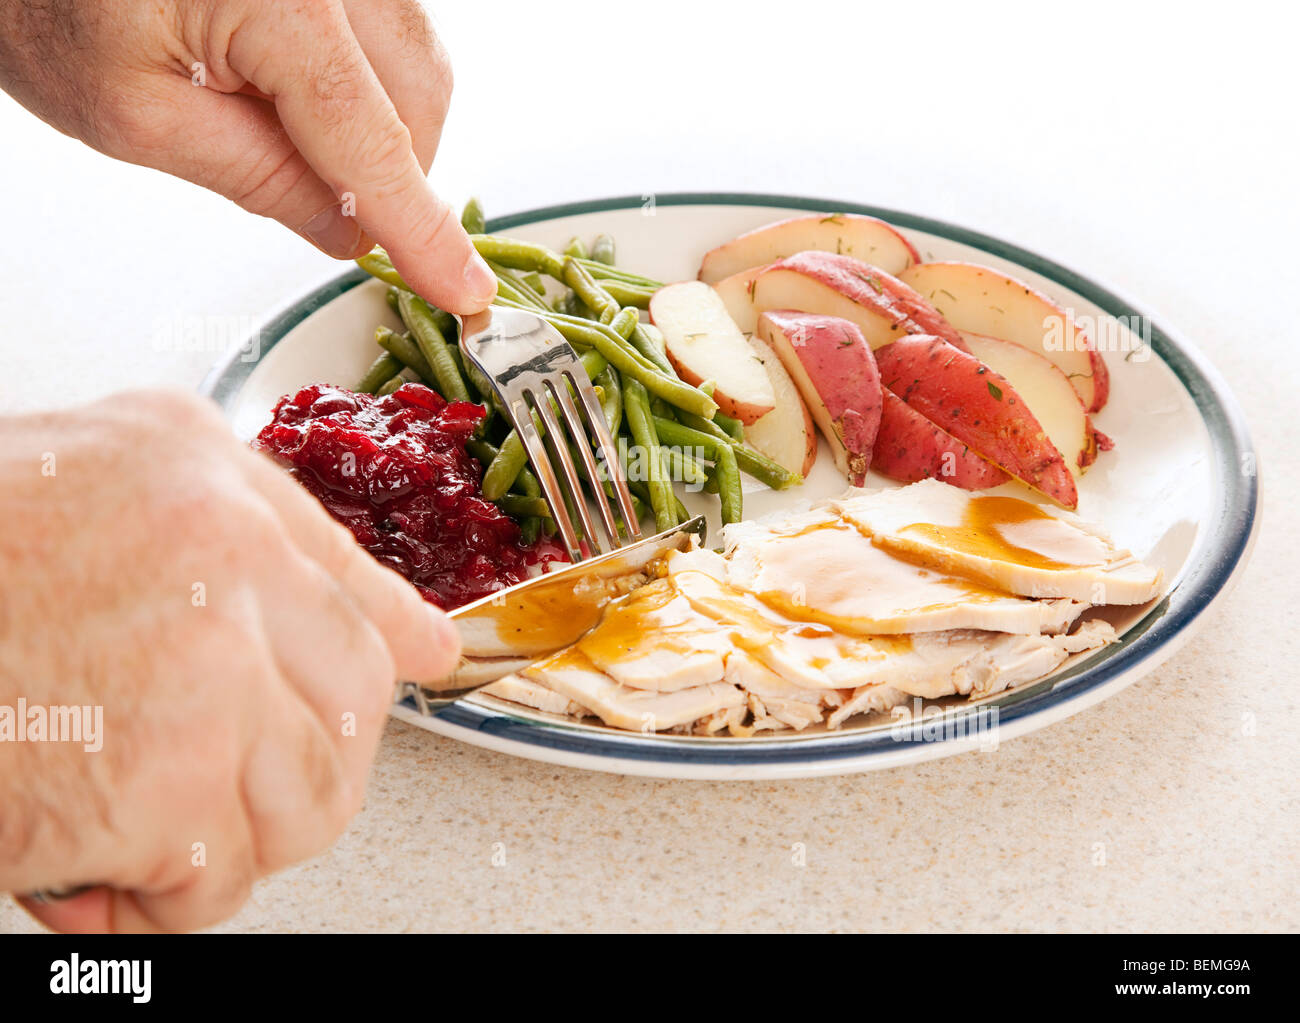 Man's hands eating a delicious turkey dinner for Thanksgiving or other meal.  Stock Photo